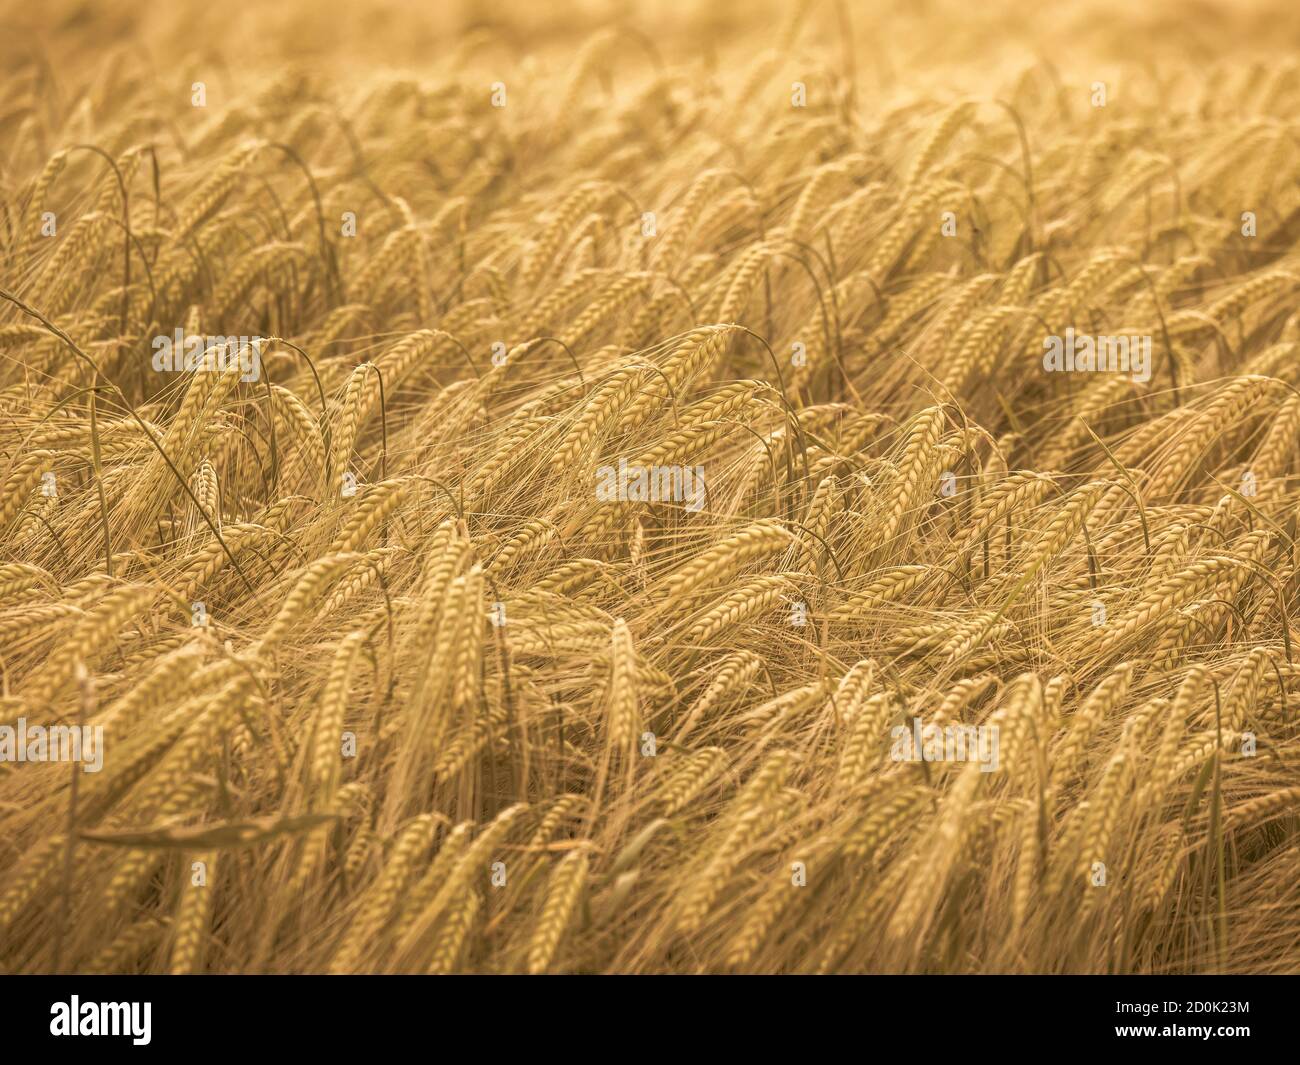 Wheat field. Ears of golden wheat close up. Rural Scenery during Shining sunset. close-up Stock Photo